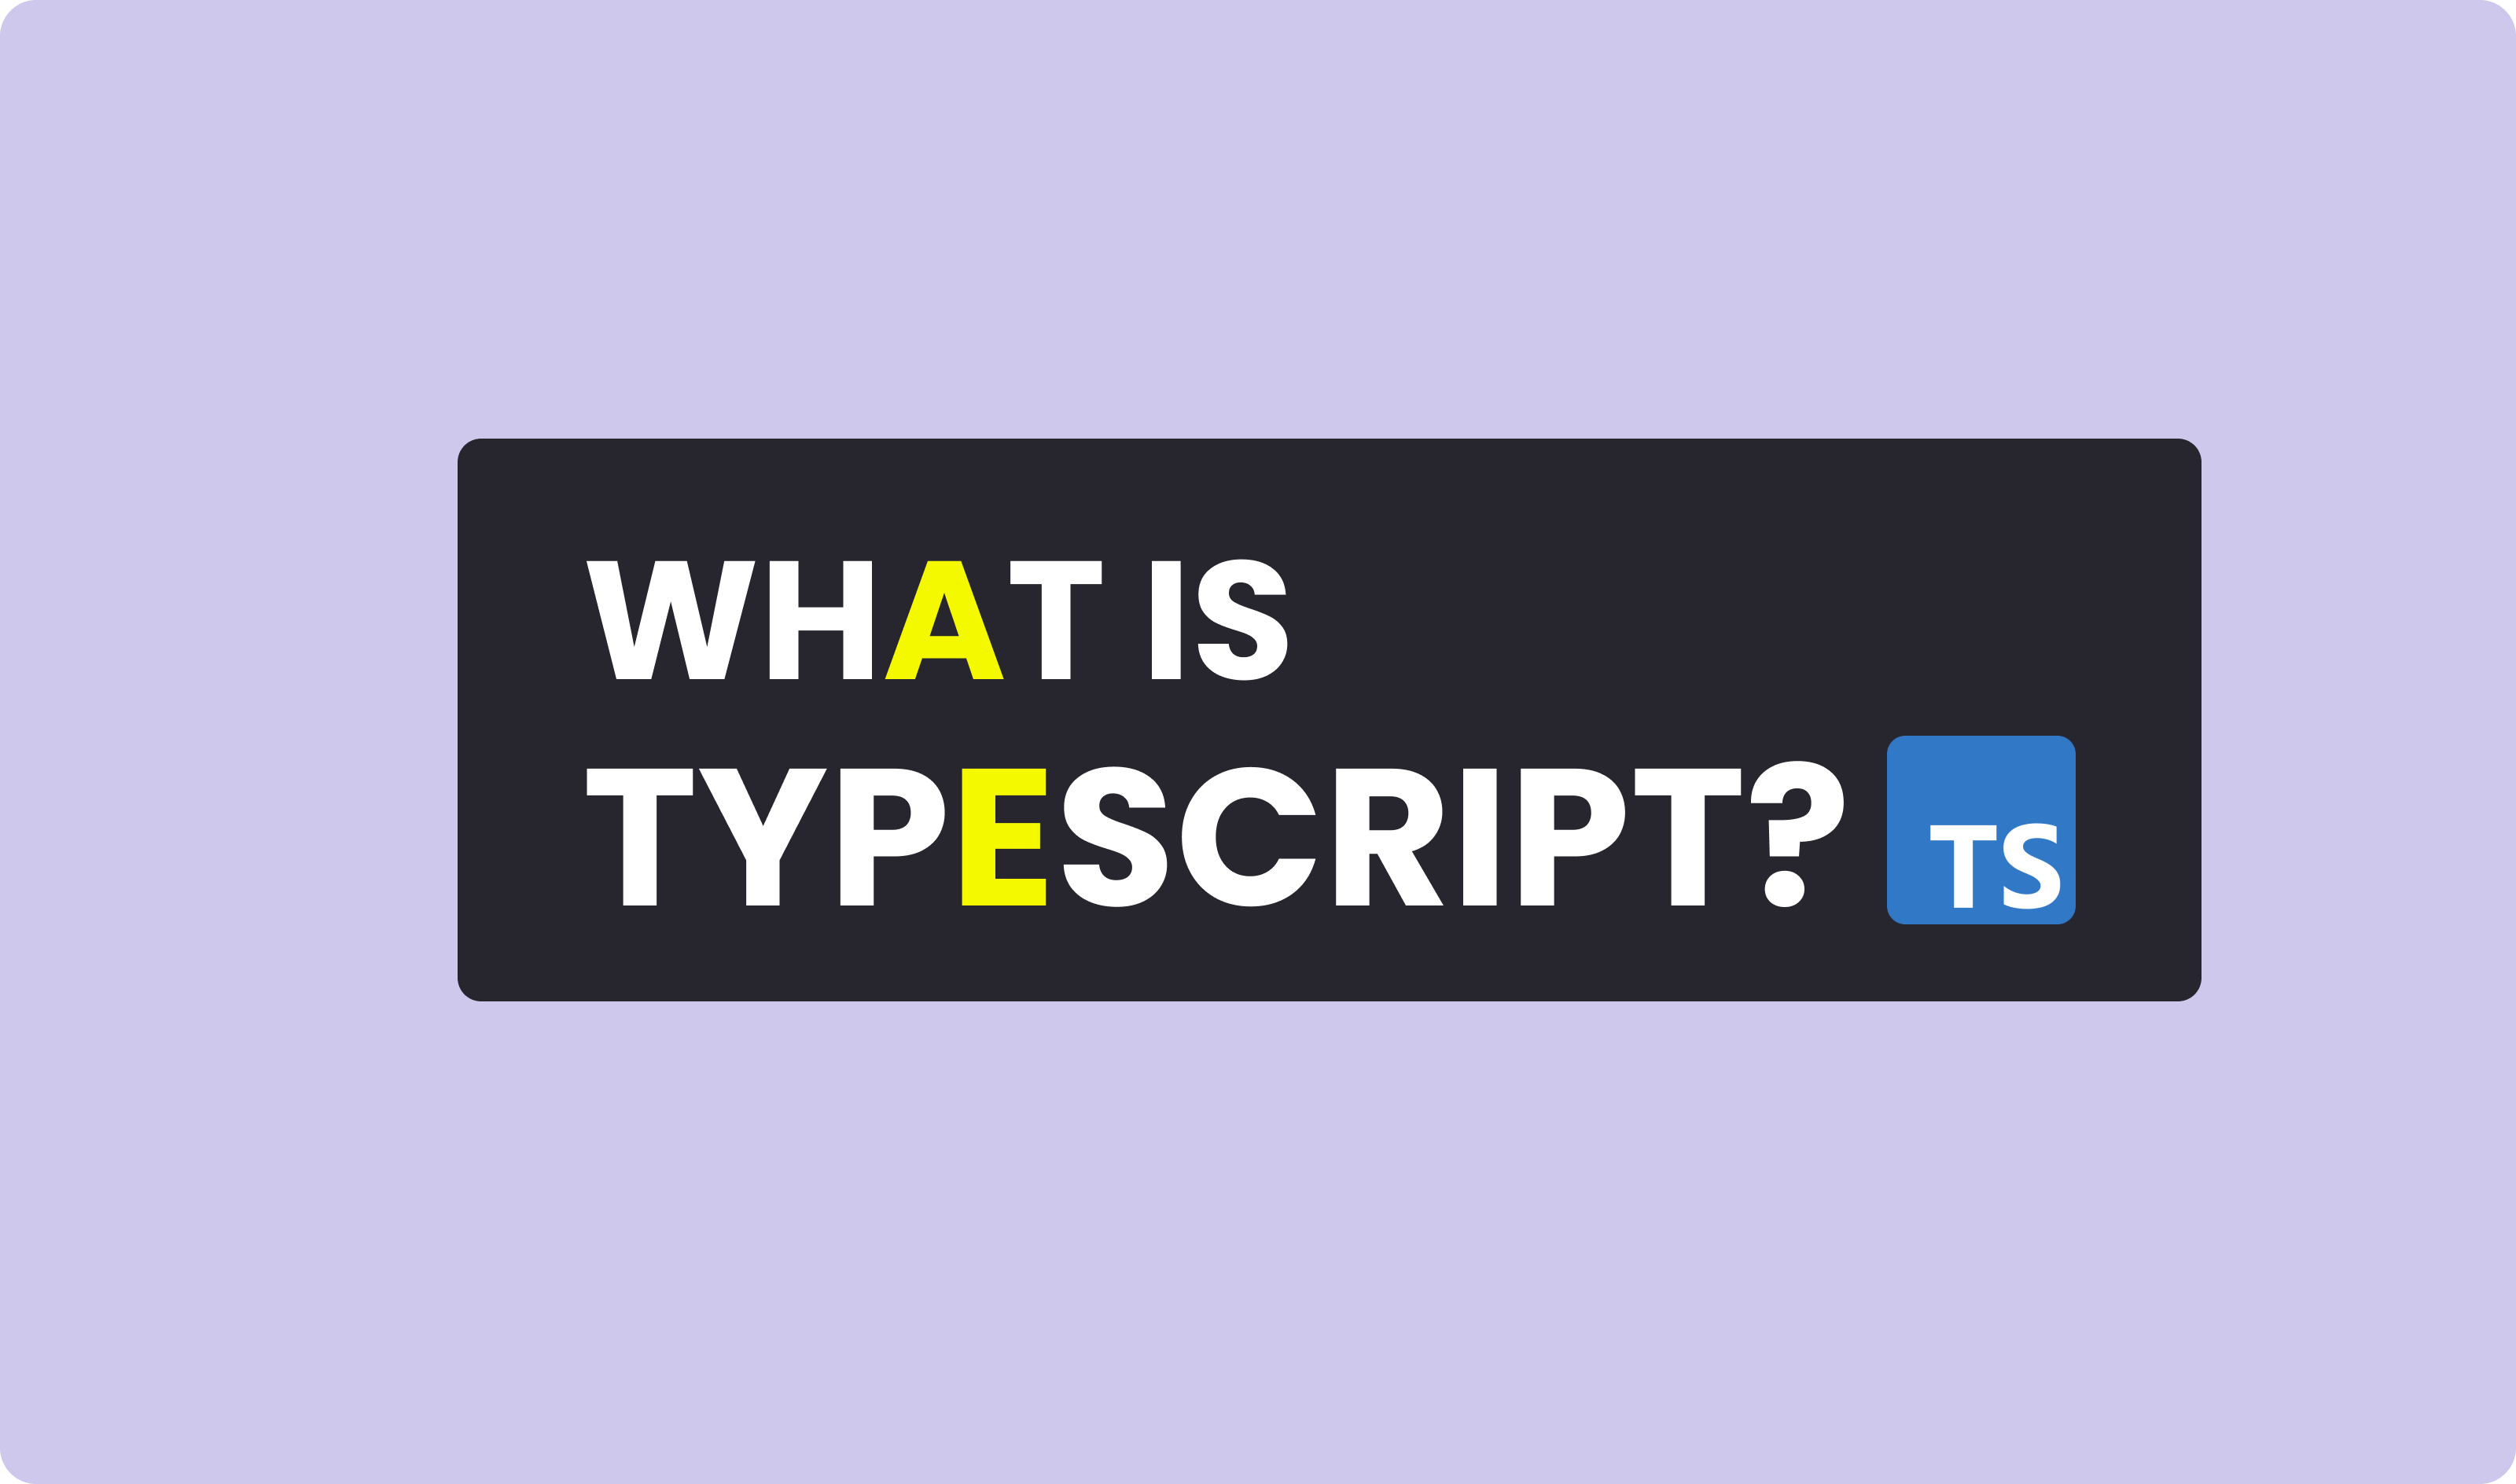 What is Typescript?